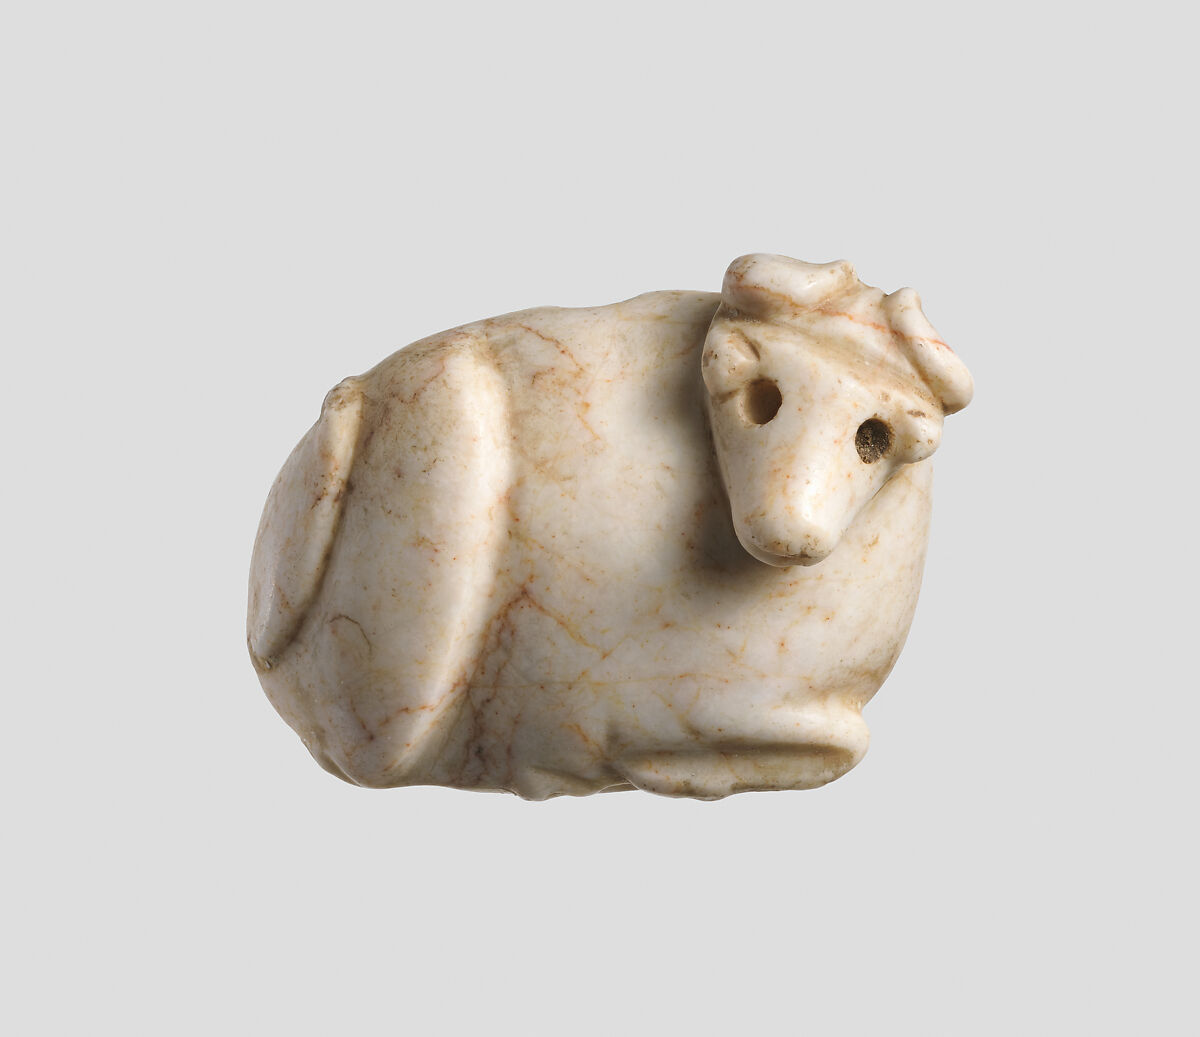 Seal amulet in the form of a reclining cow, Marble 